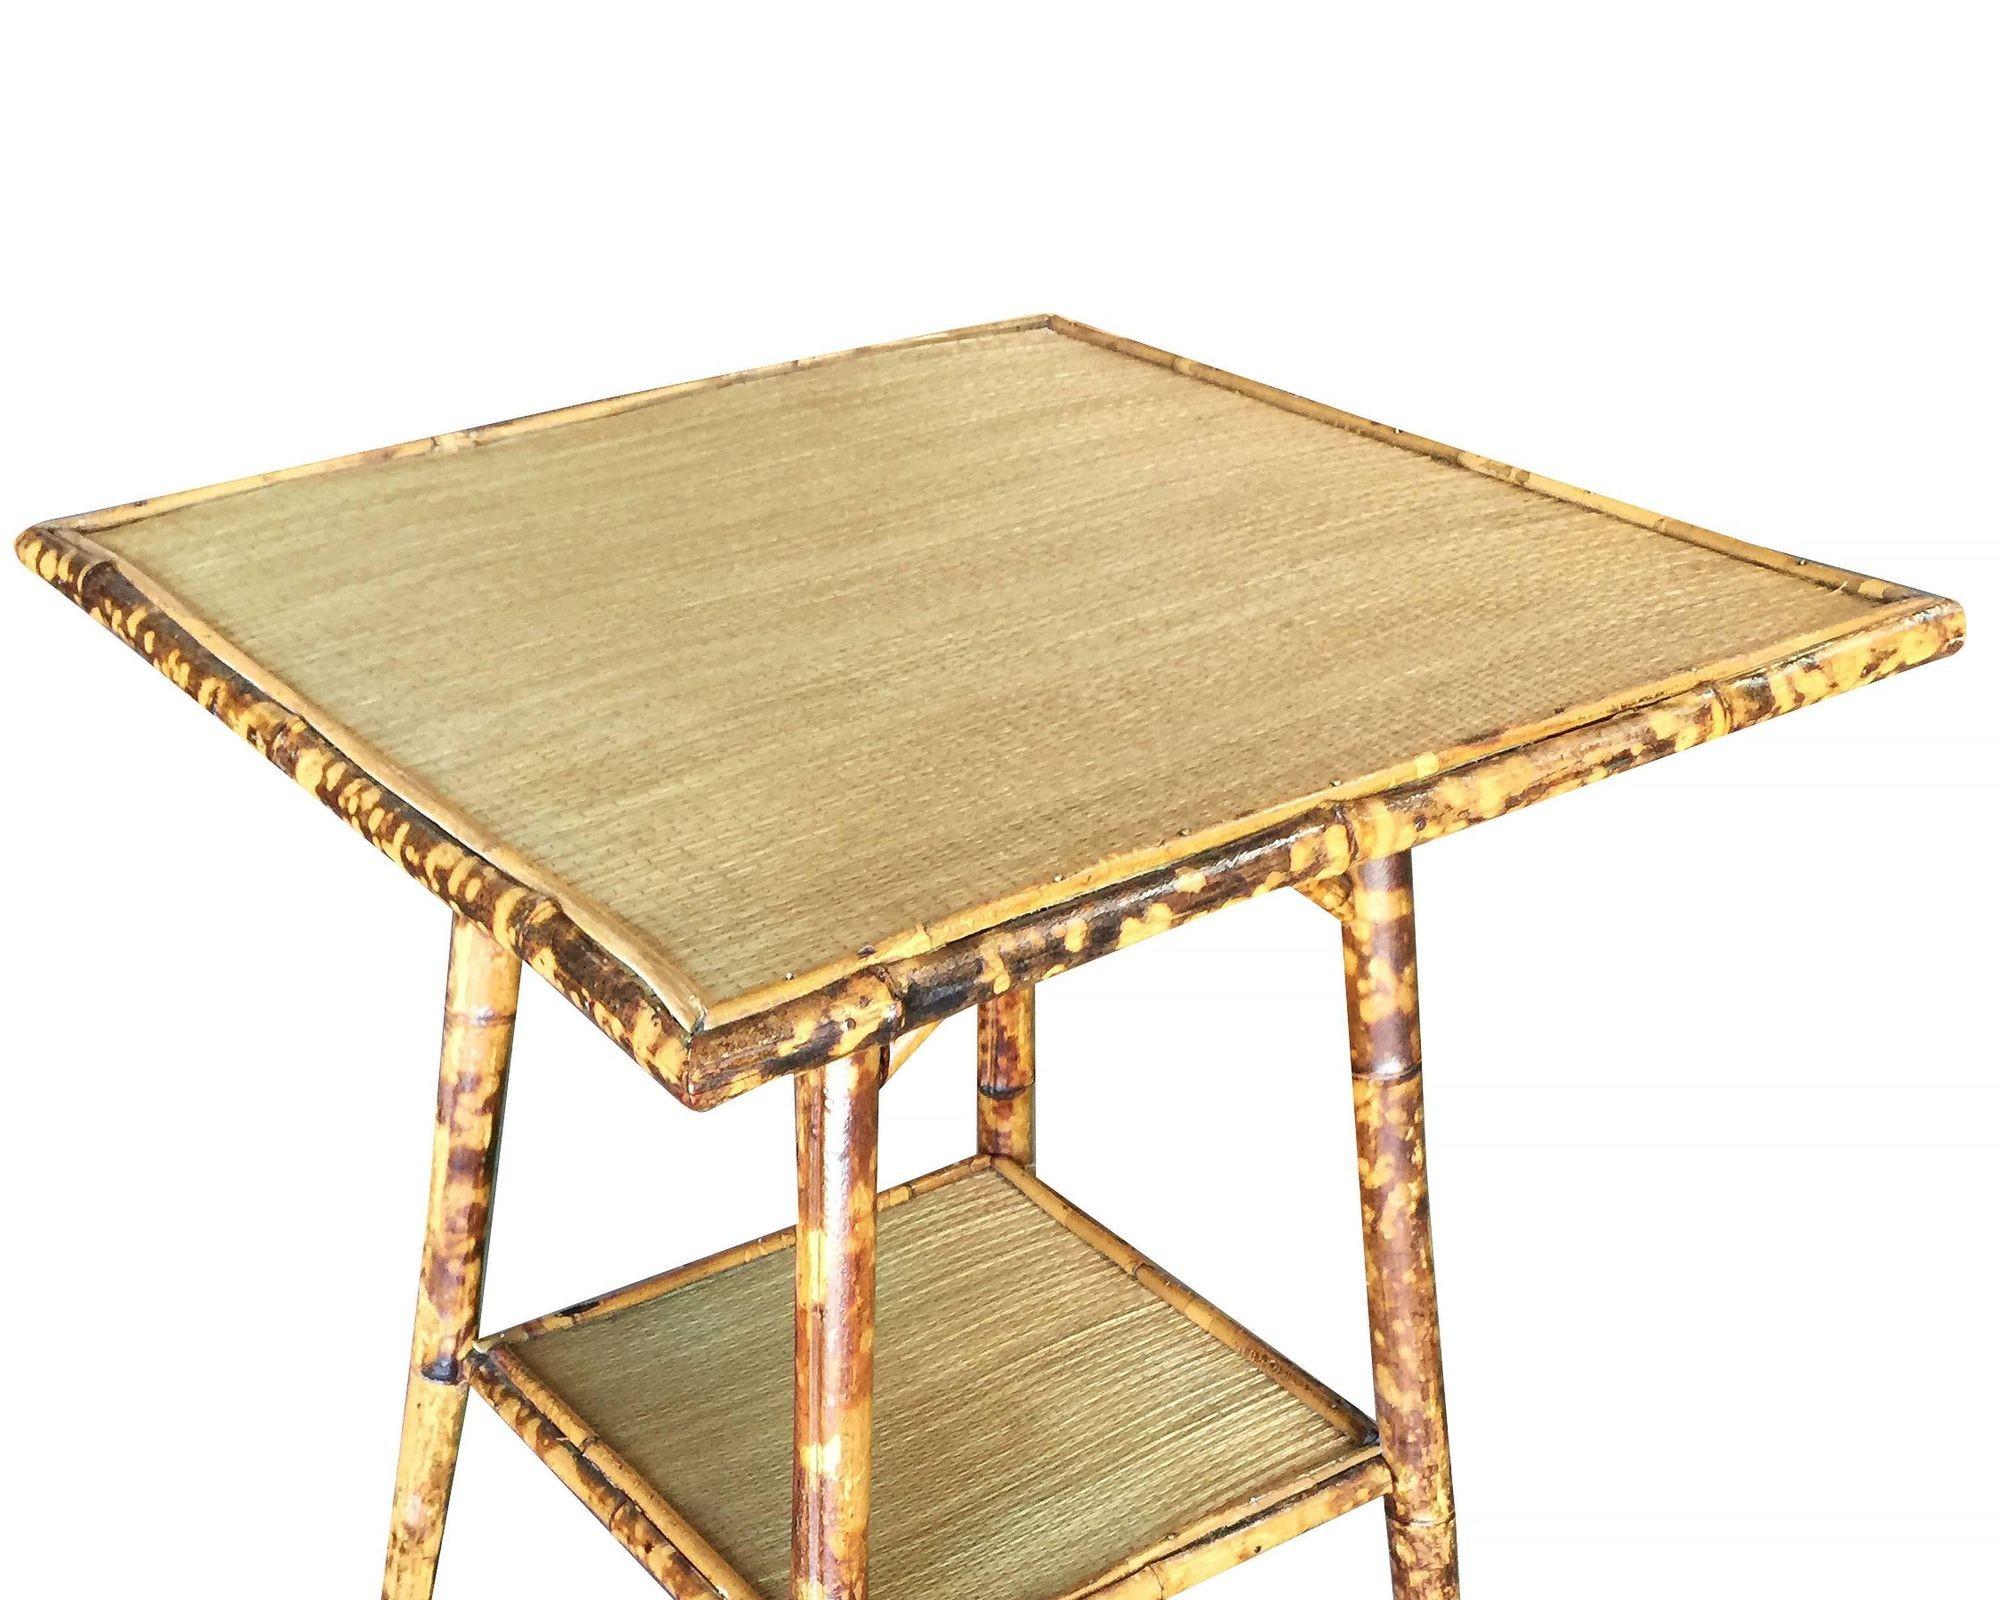 Antique tiger bamboo pedestal side table with rice mat top, large top and secondary bottom shelf.
Restored to new for you.

All rattan, bamboo and wicker furniture has been painstakingly refurbished to the highest standards with the best materials.